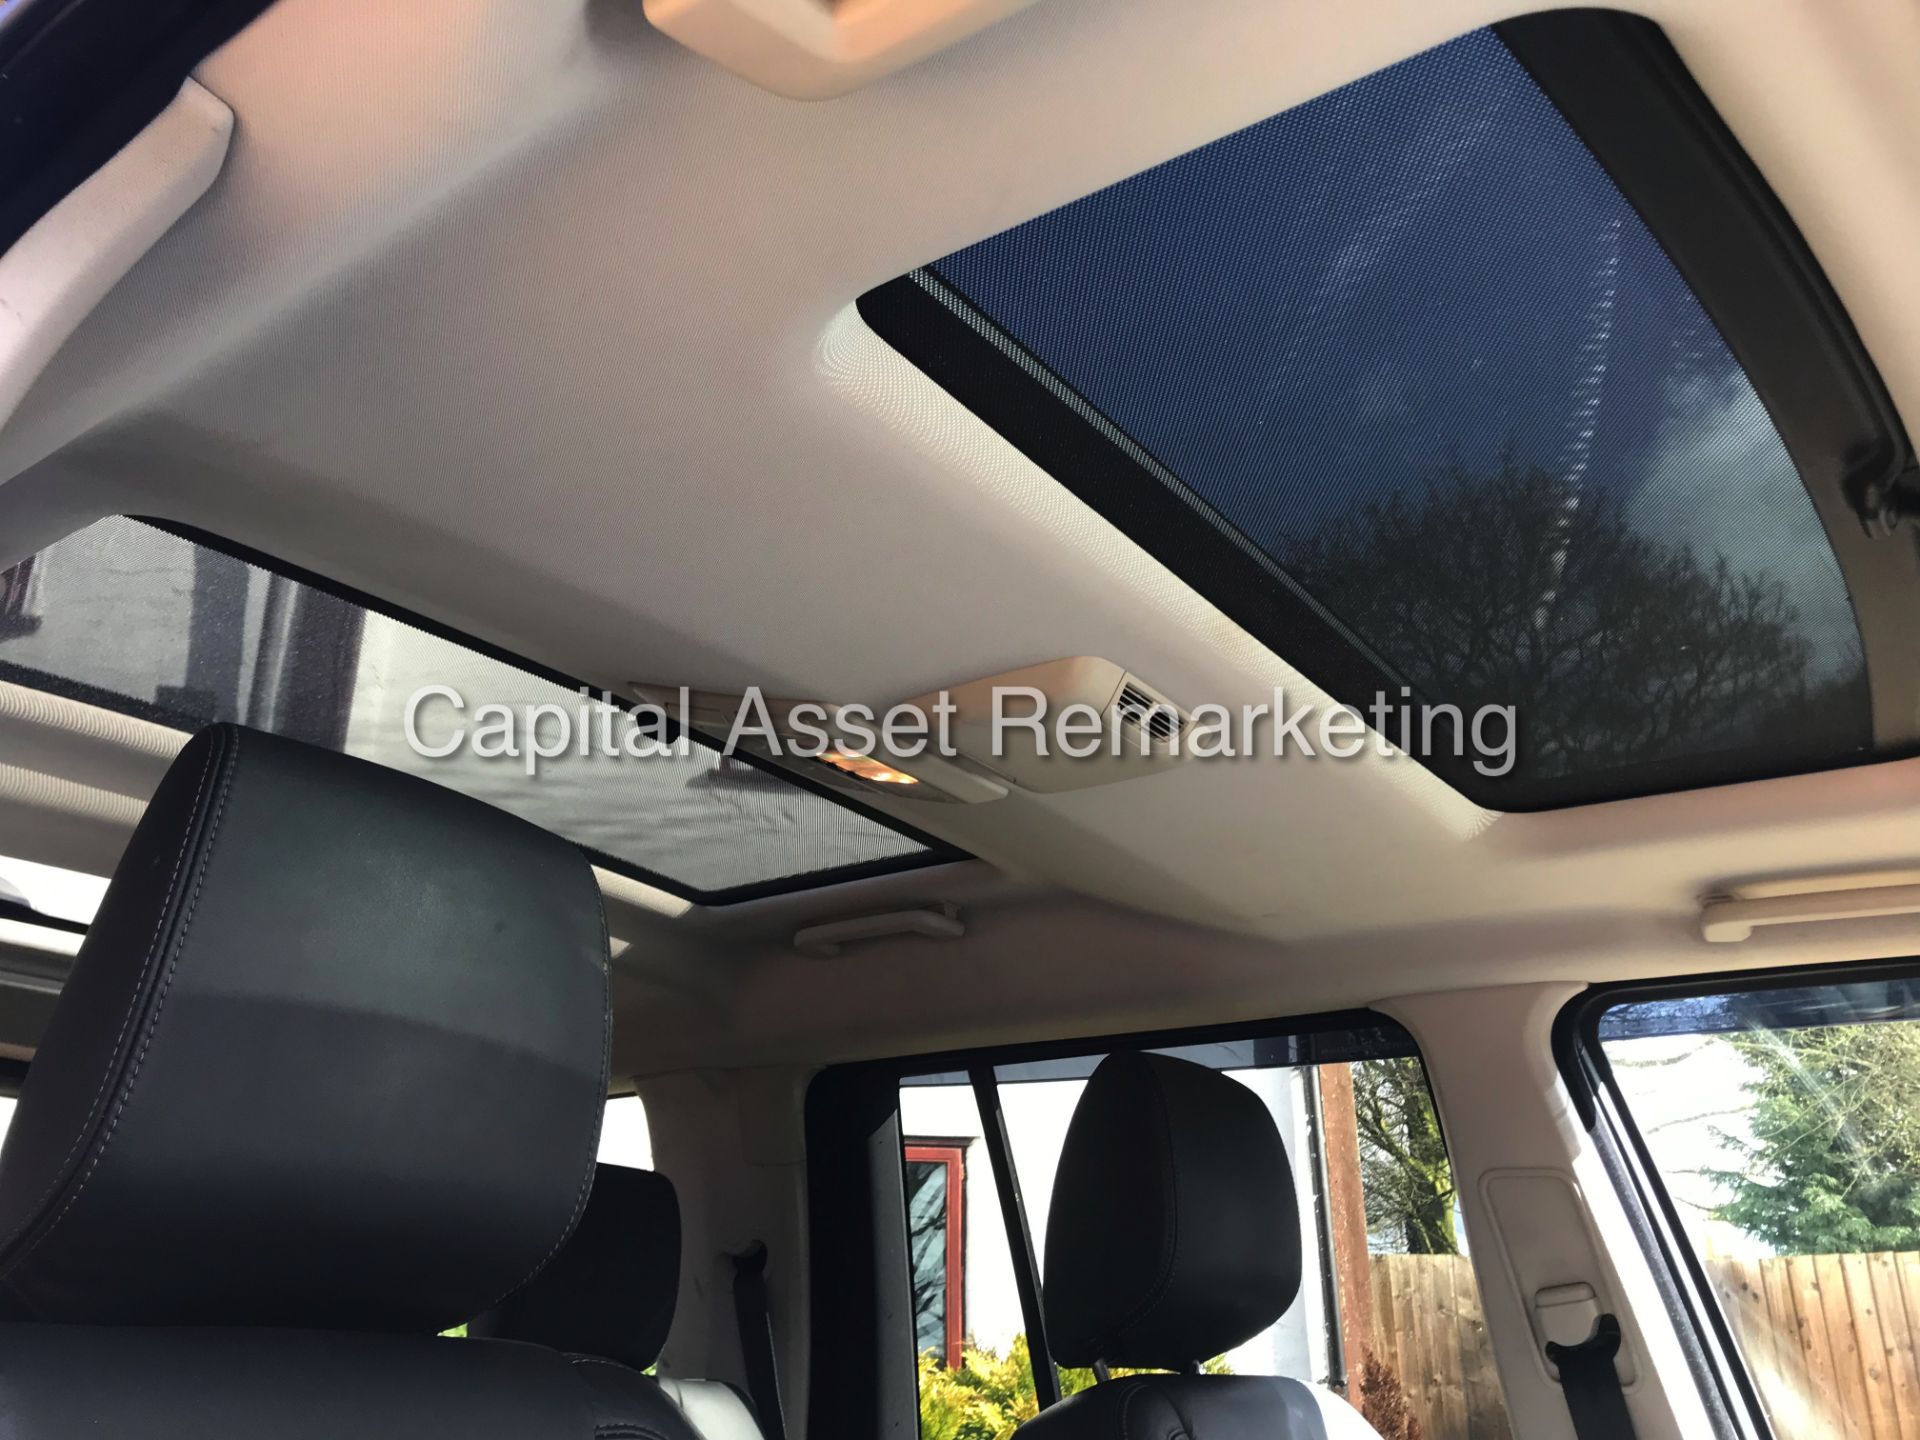 LAND ROVER DISCOVERY 4 "HSE" 3.0 SDV6 AUTOMATIC (13 REG) 7 SEATER - FULL LEATHER - SAT NAV *LOOK* - Image 22 of 25